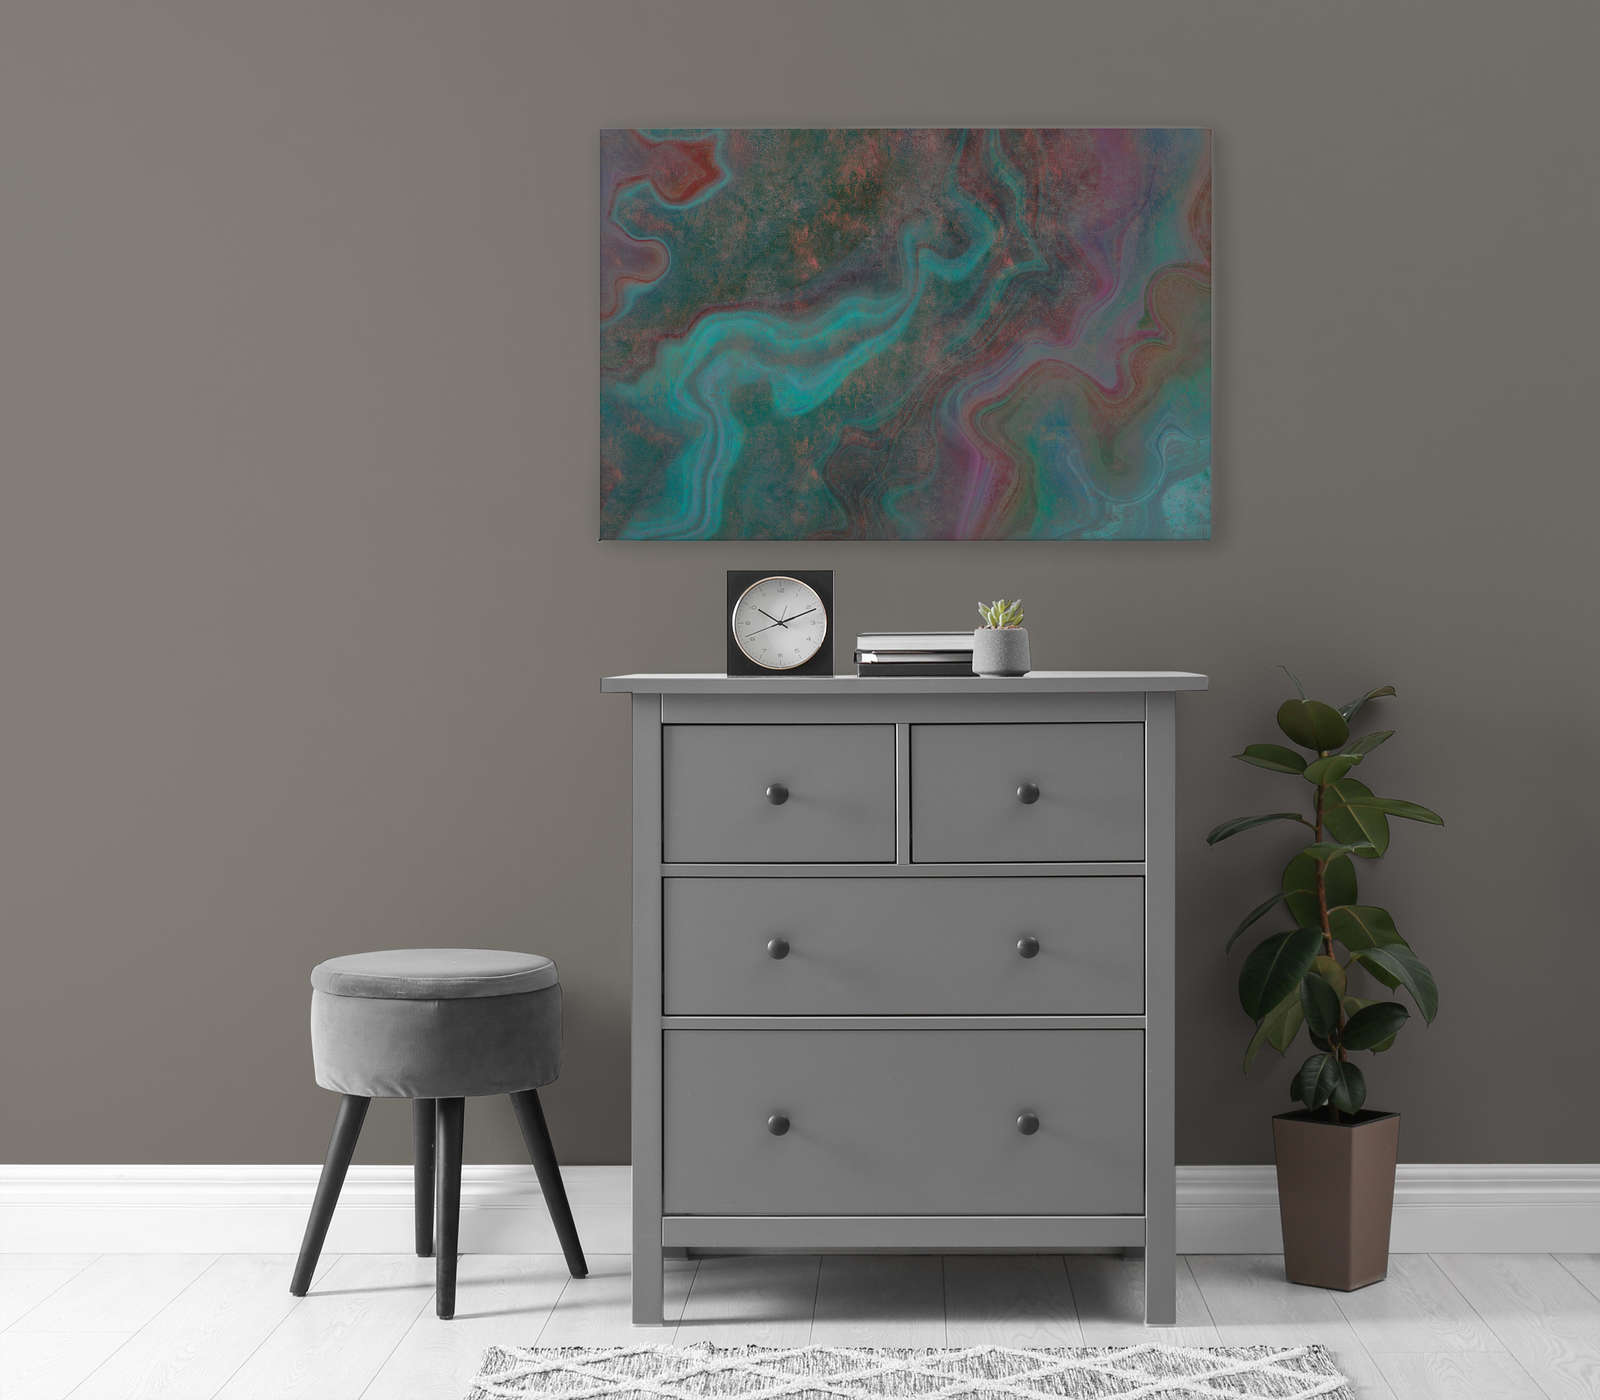             Marble 3 - Canvas painting with scratch structure in colourful marble look as a highlight - 0.90 m x 0.60 m
        